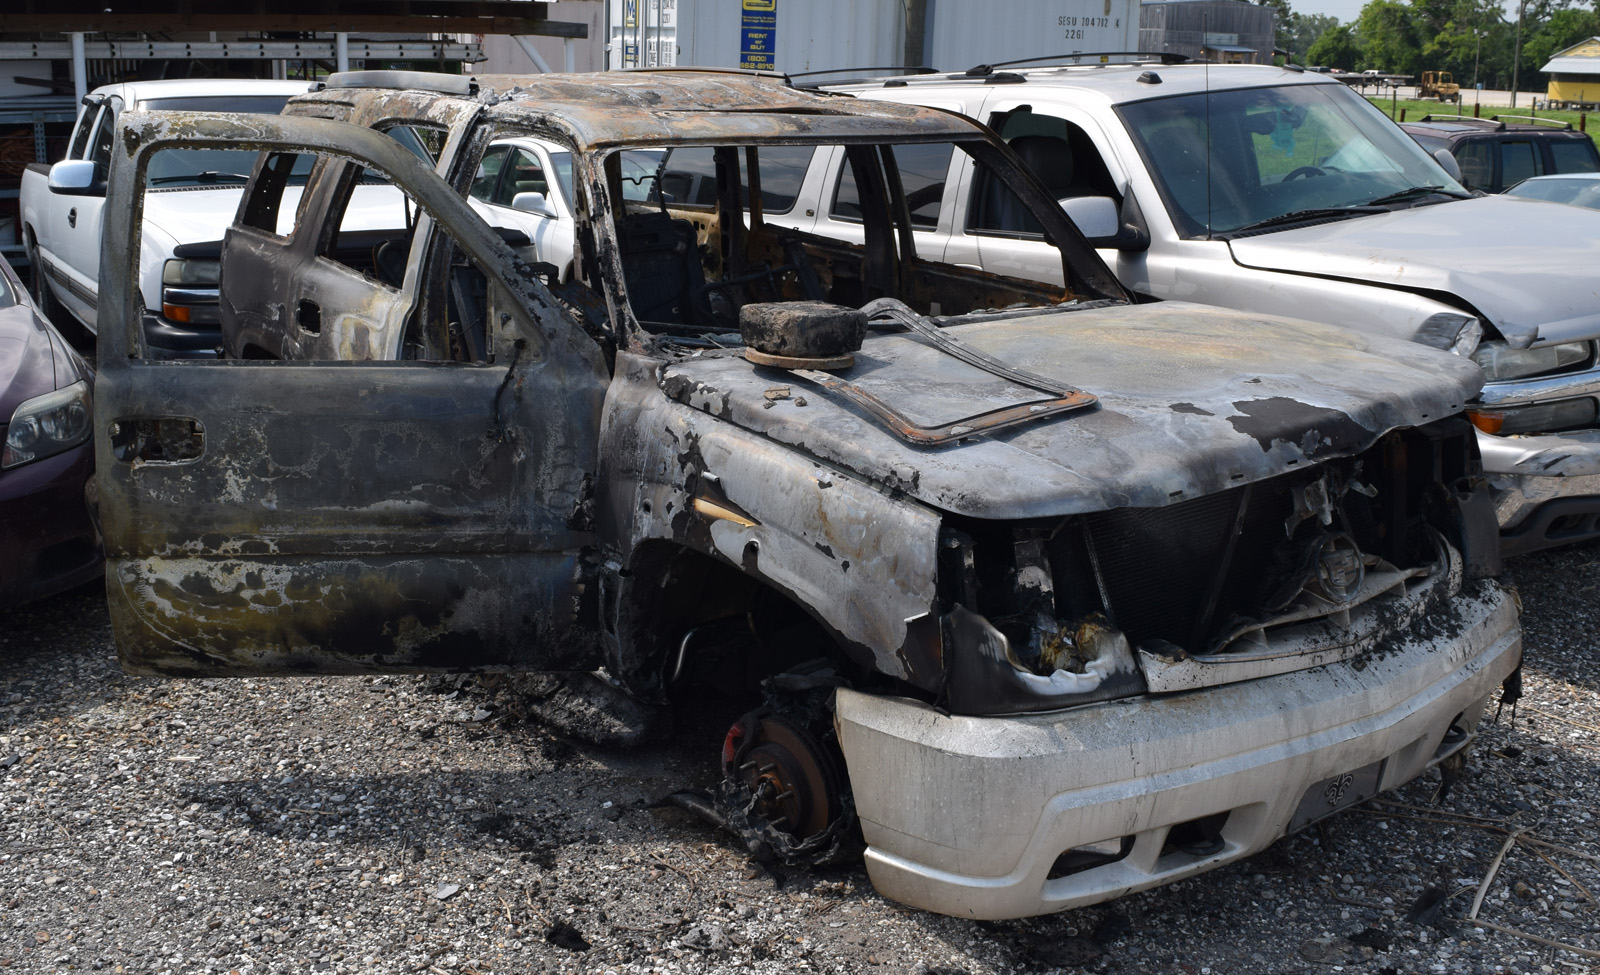 Burned SUV found in Thibodaux (after being towed)